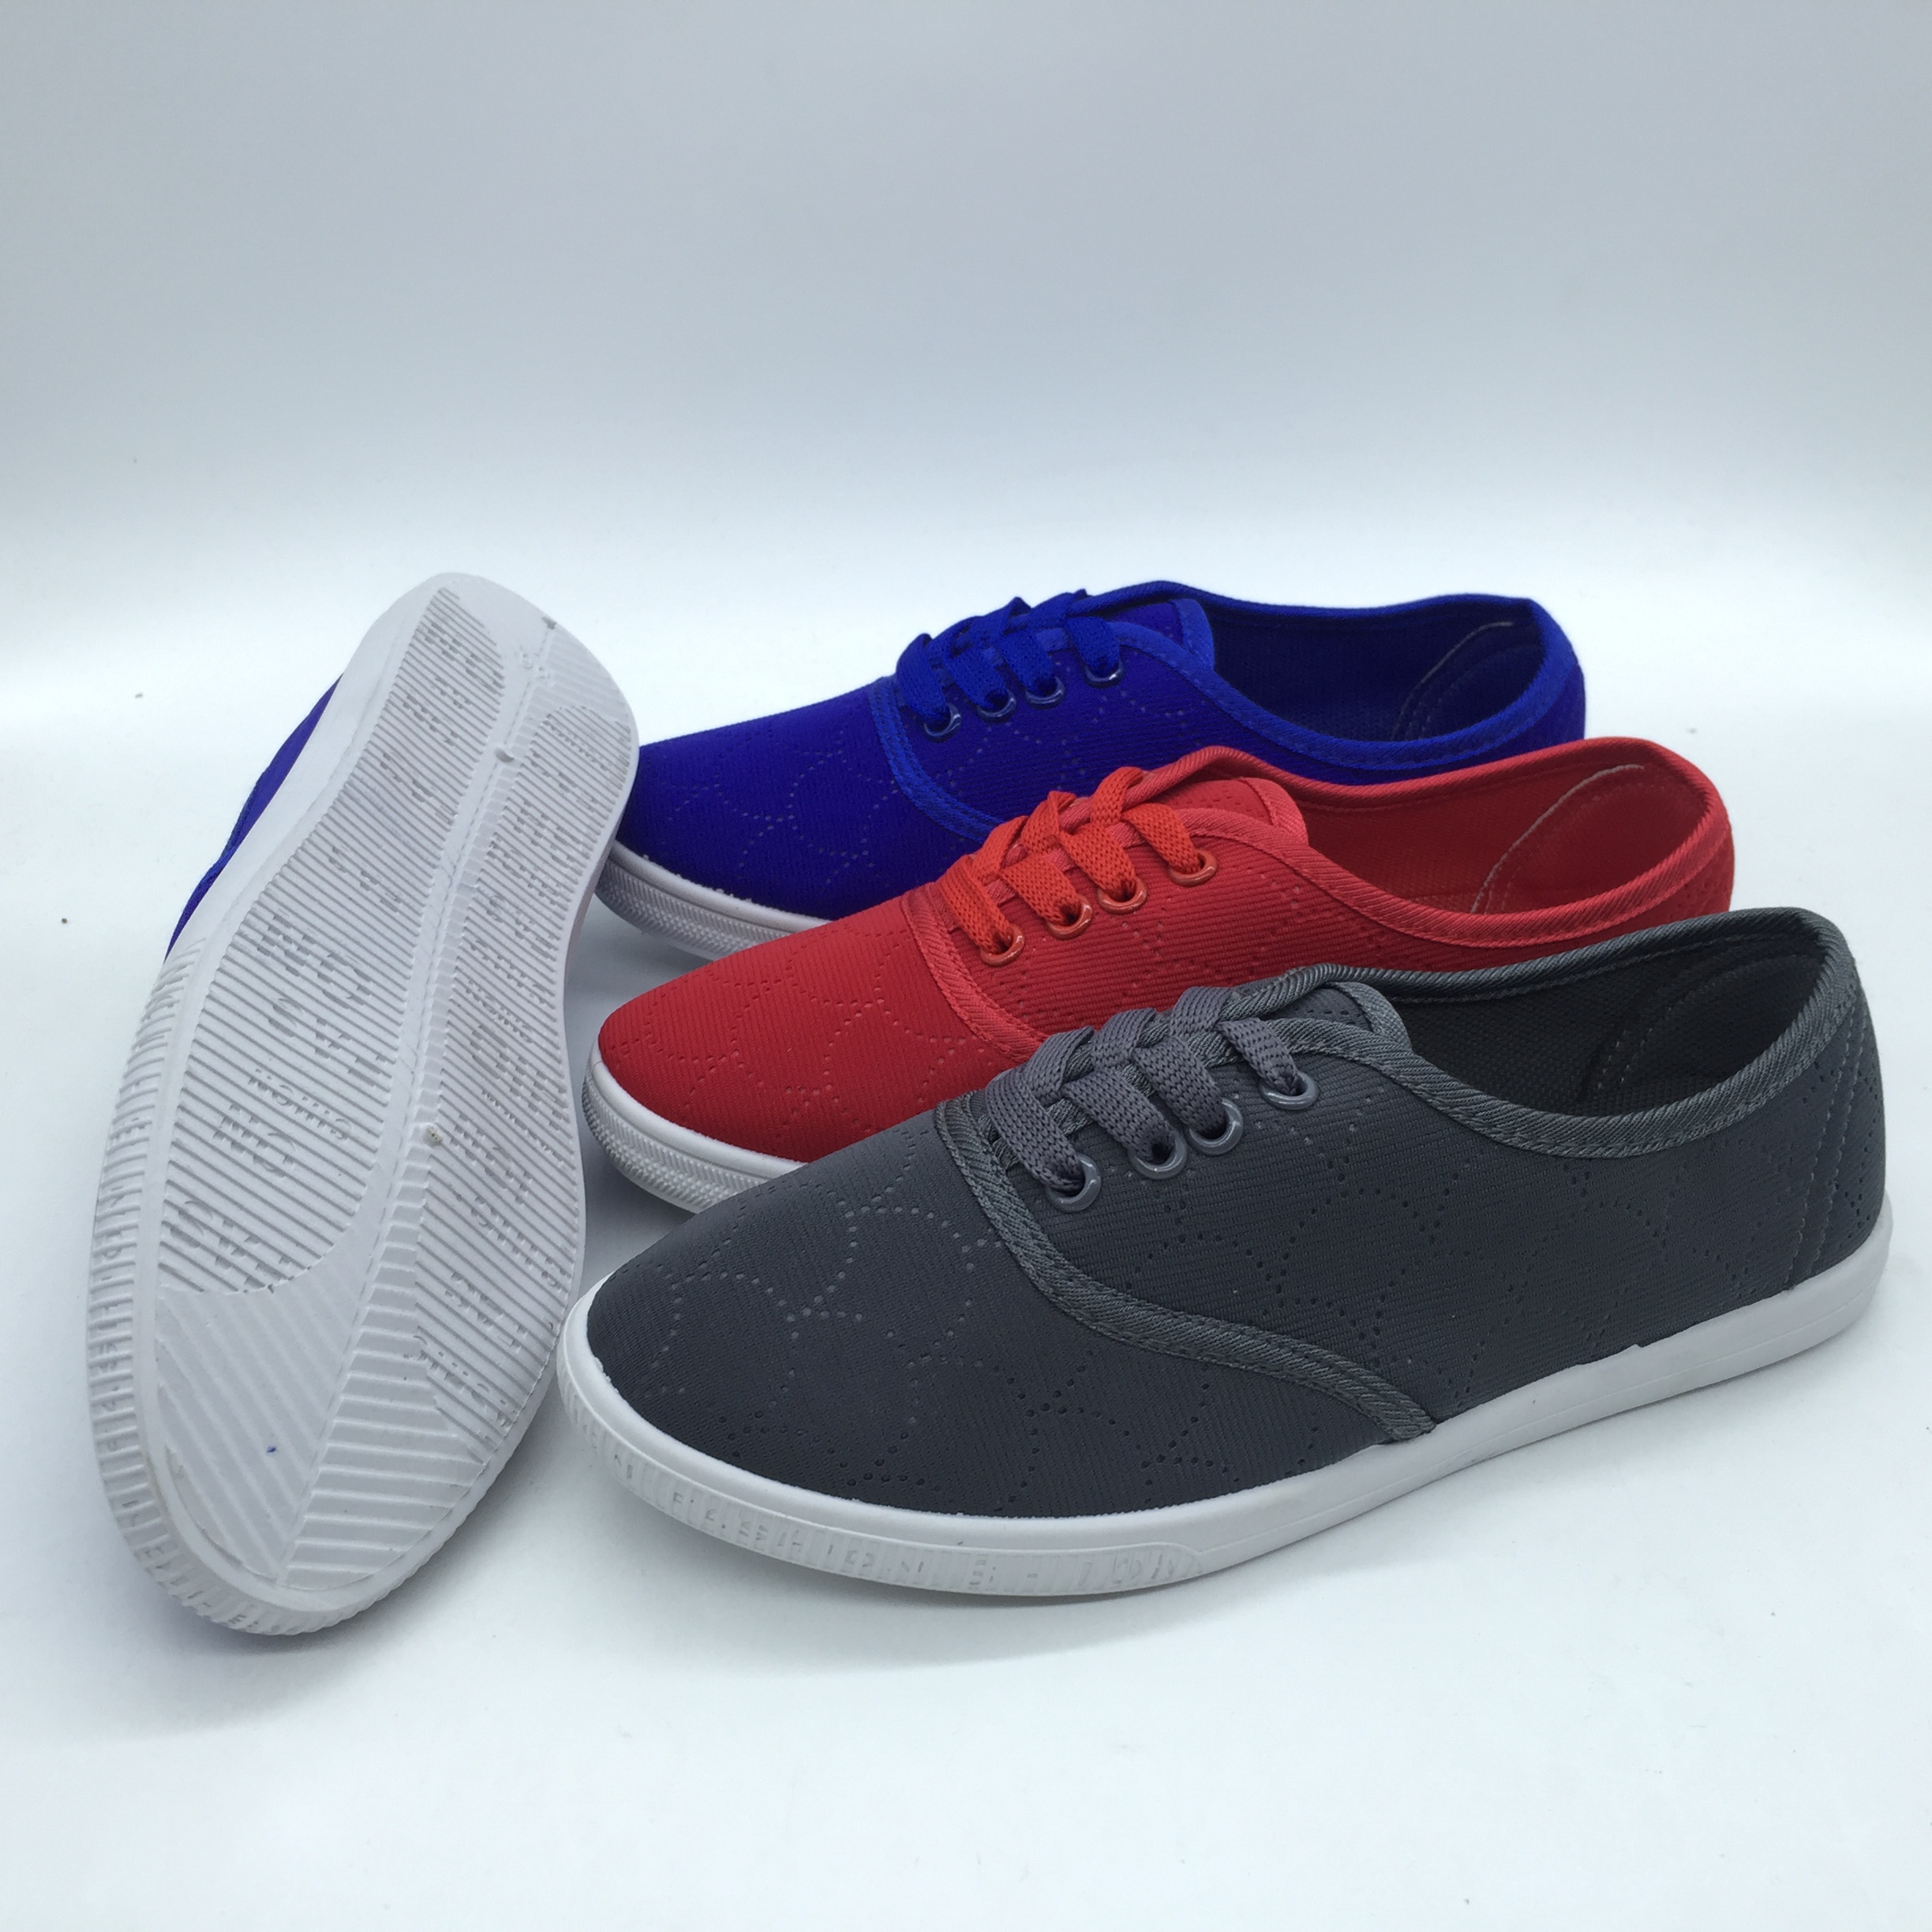 New style injection canvas shoes casual shoes leisure shoes ...